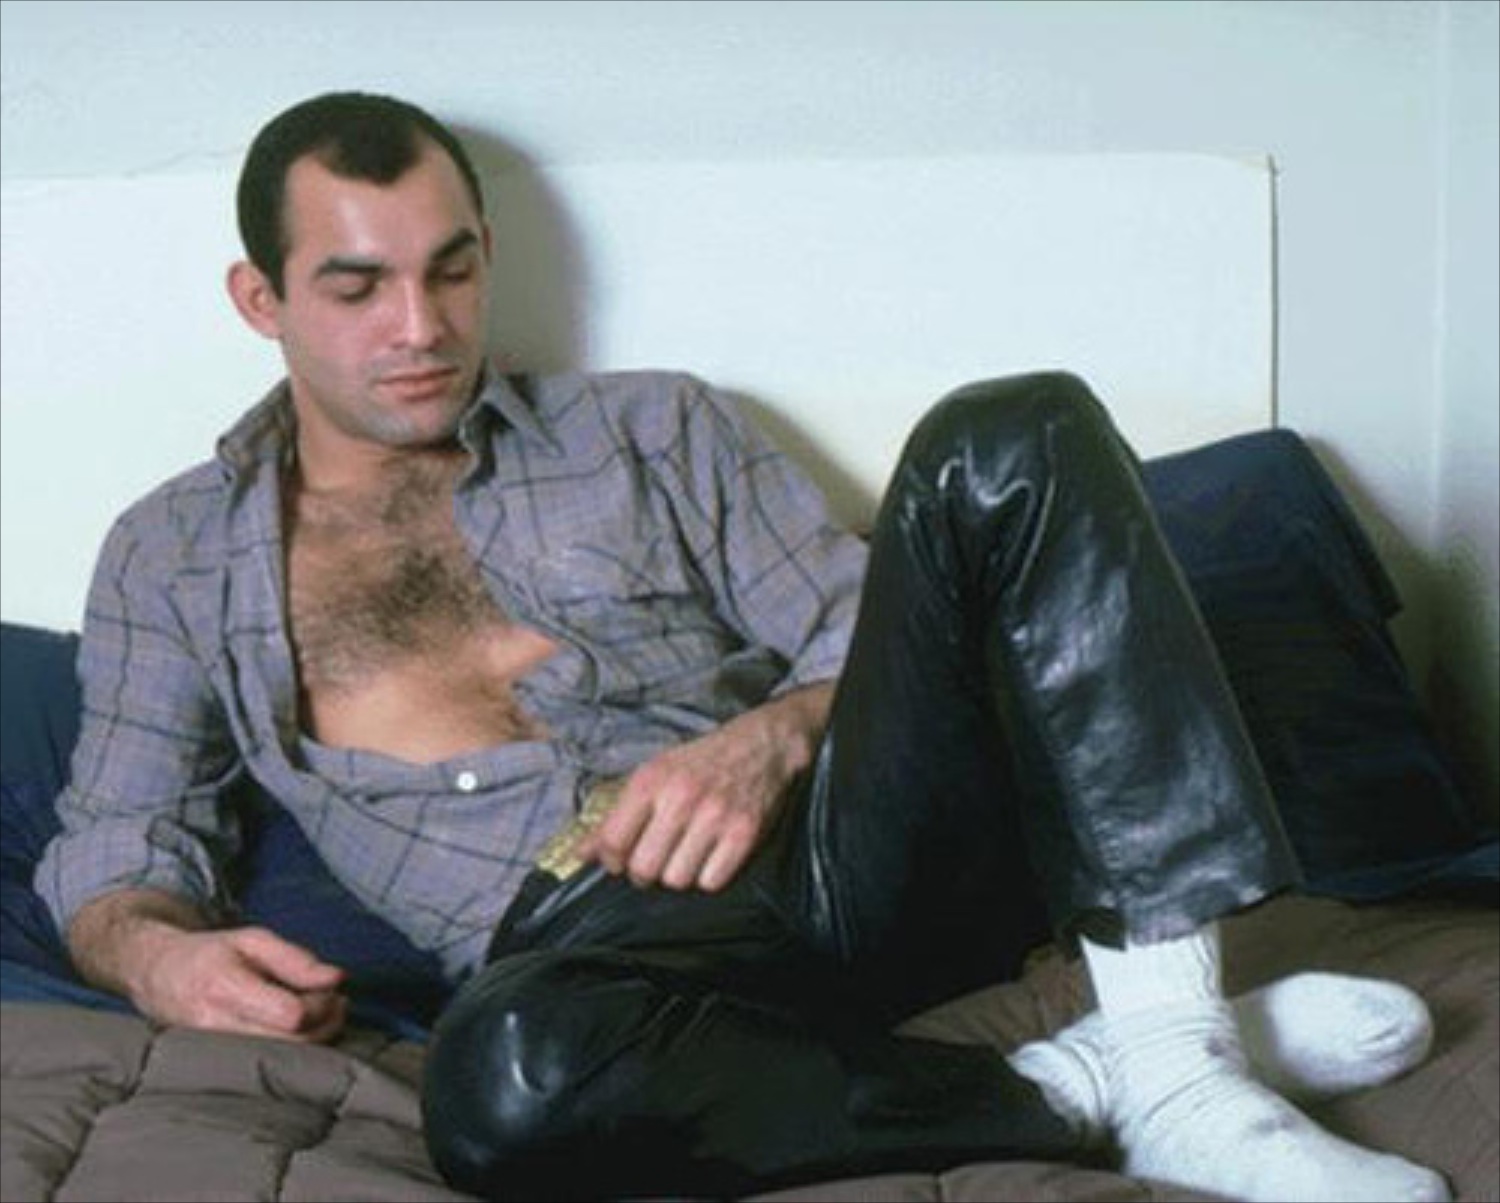 Man with Leather Pants
